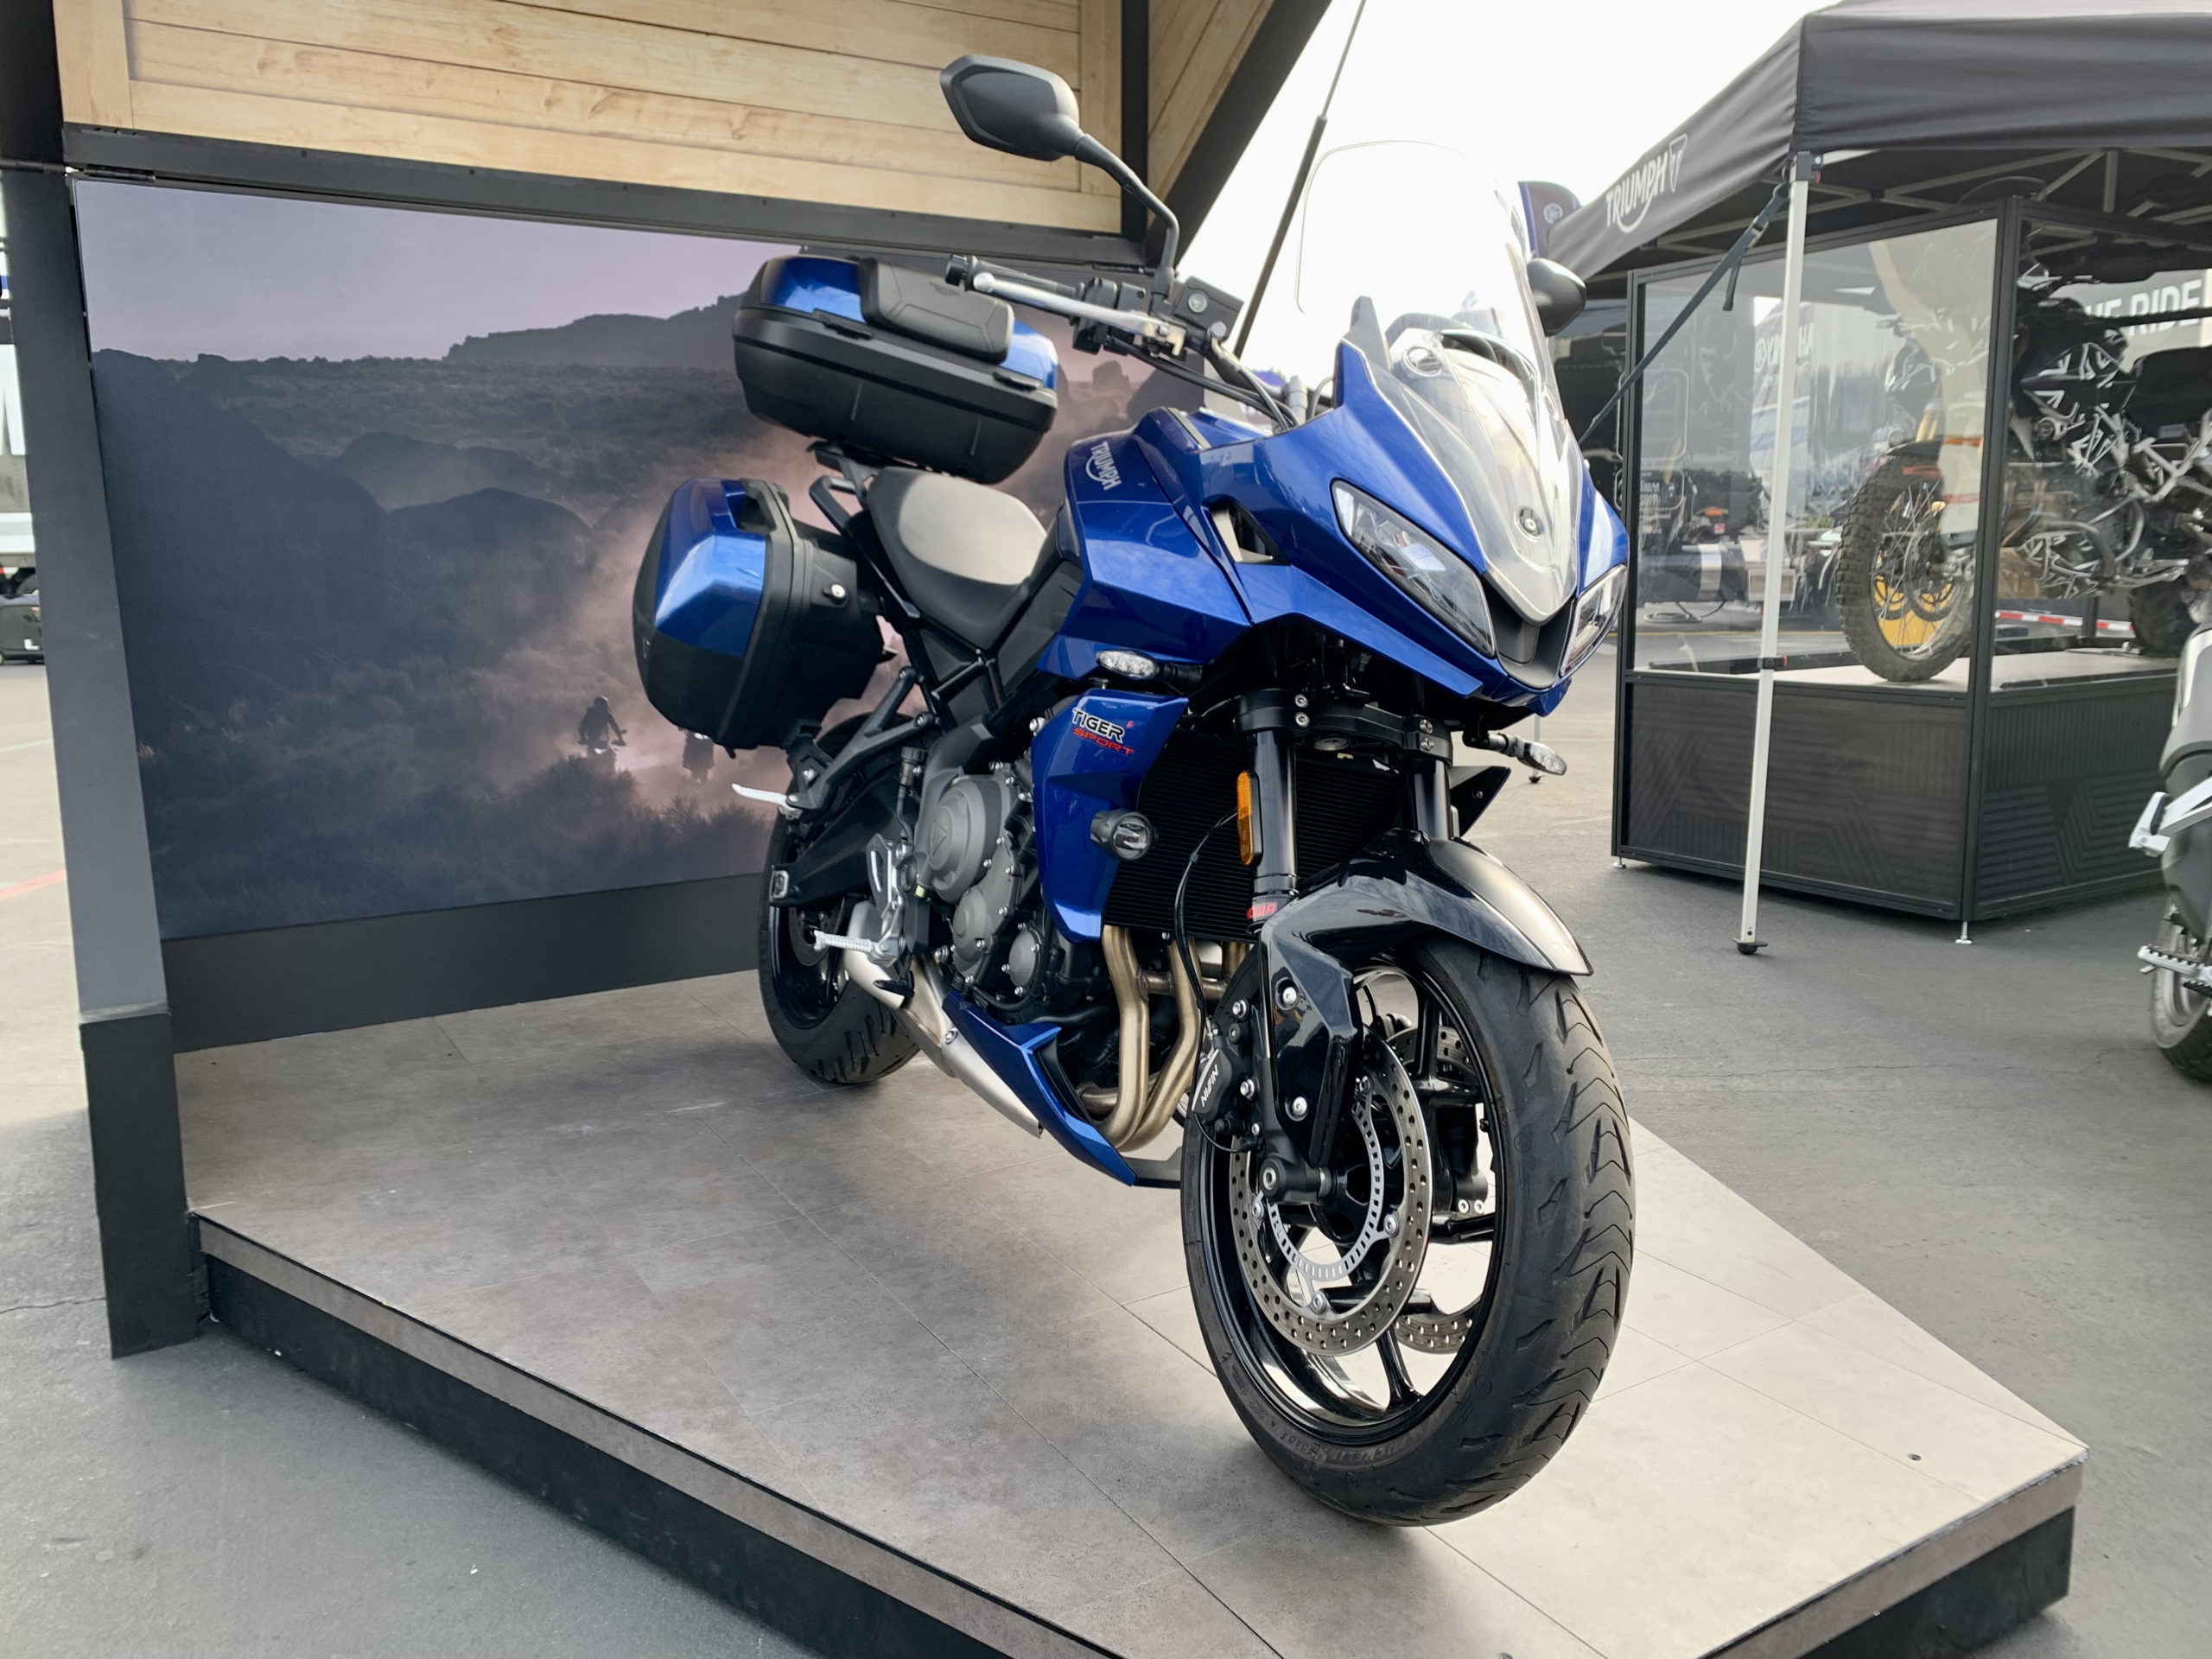 2022 Tiger Sport 660 on display at IMS Outdoors 2021